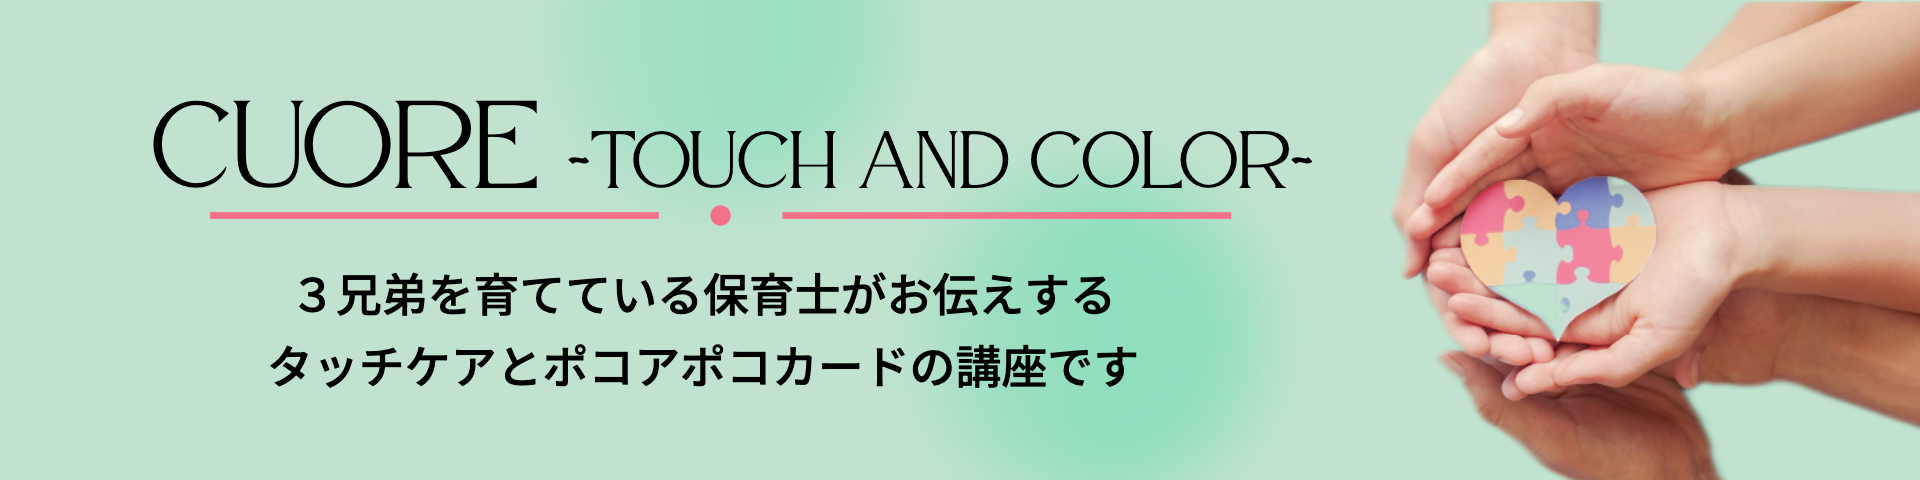 Cuore ~touch and color~